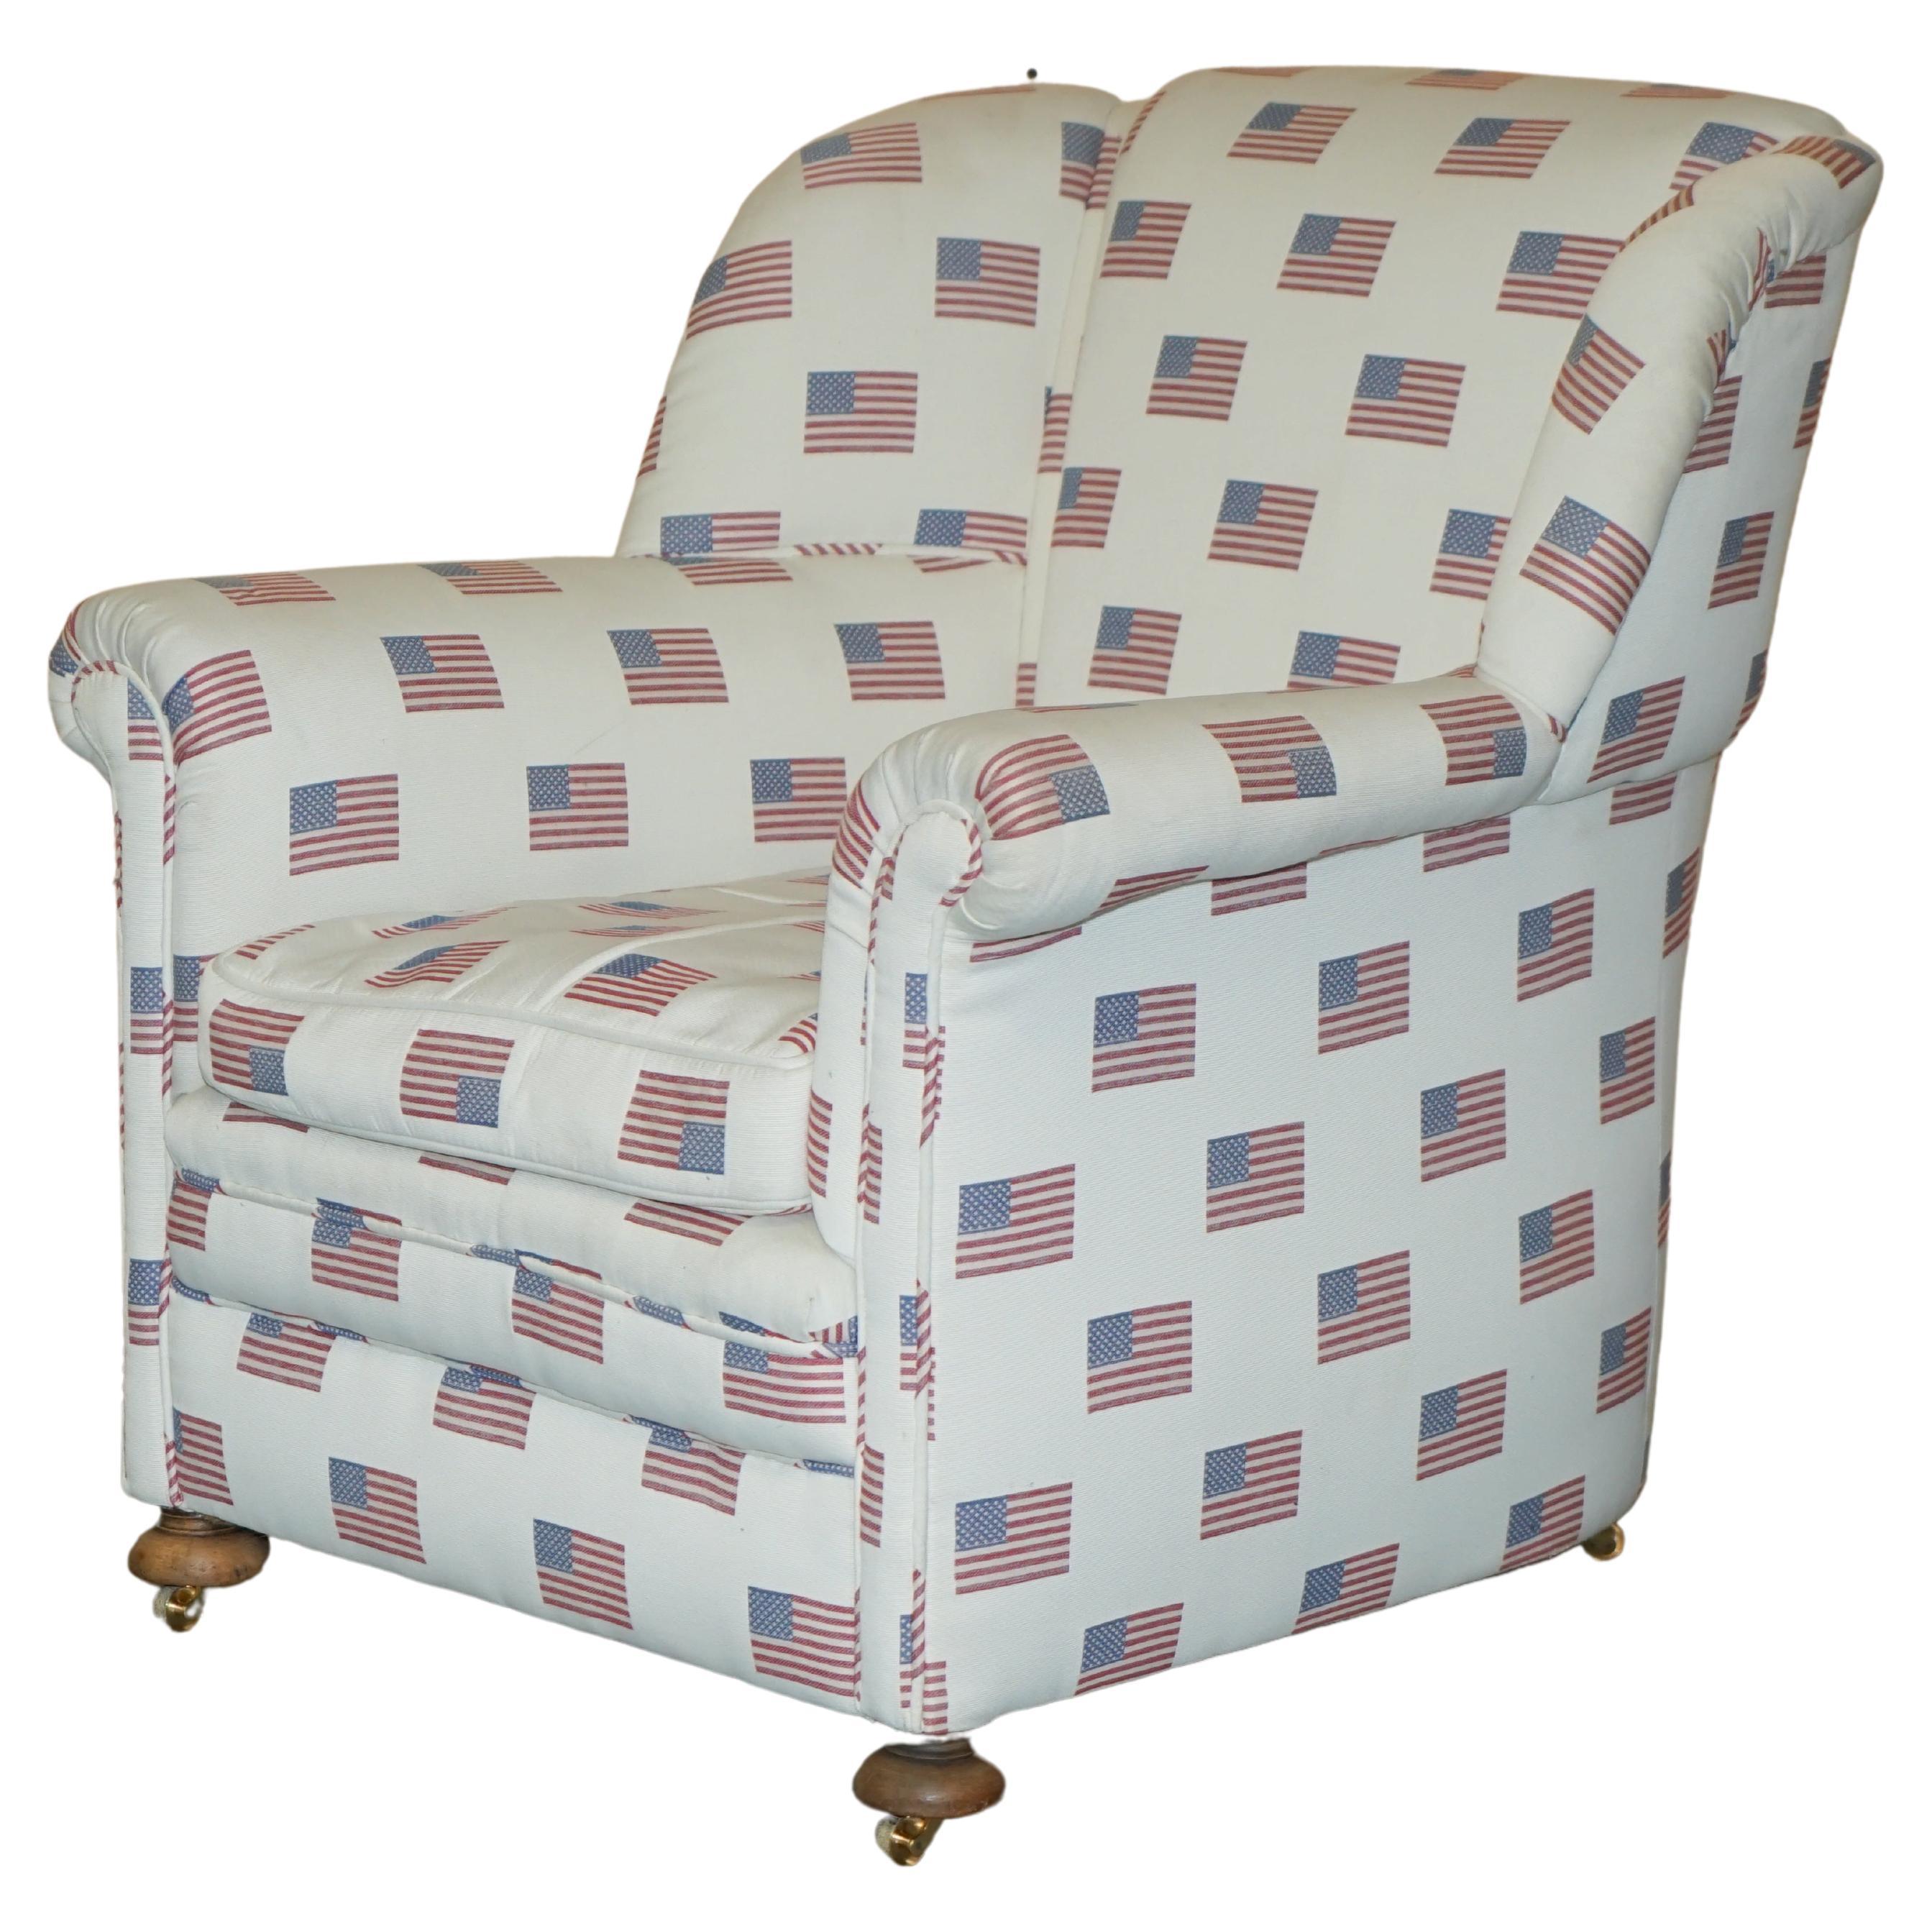 Antique Ci 1900 Victorian Club Armchair American Flag Stars & Stripes Upholstery For Sale